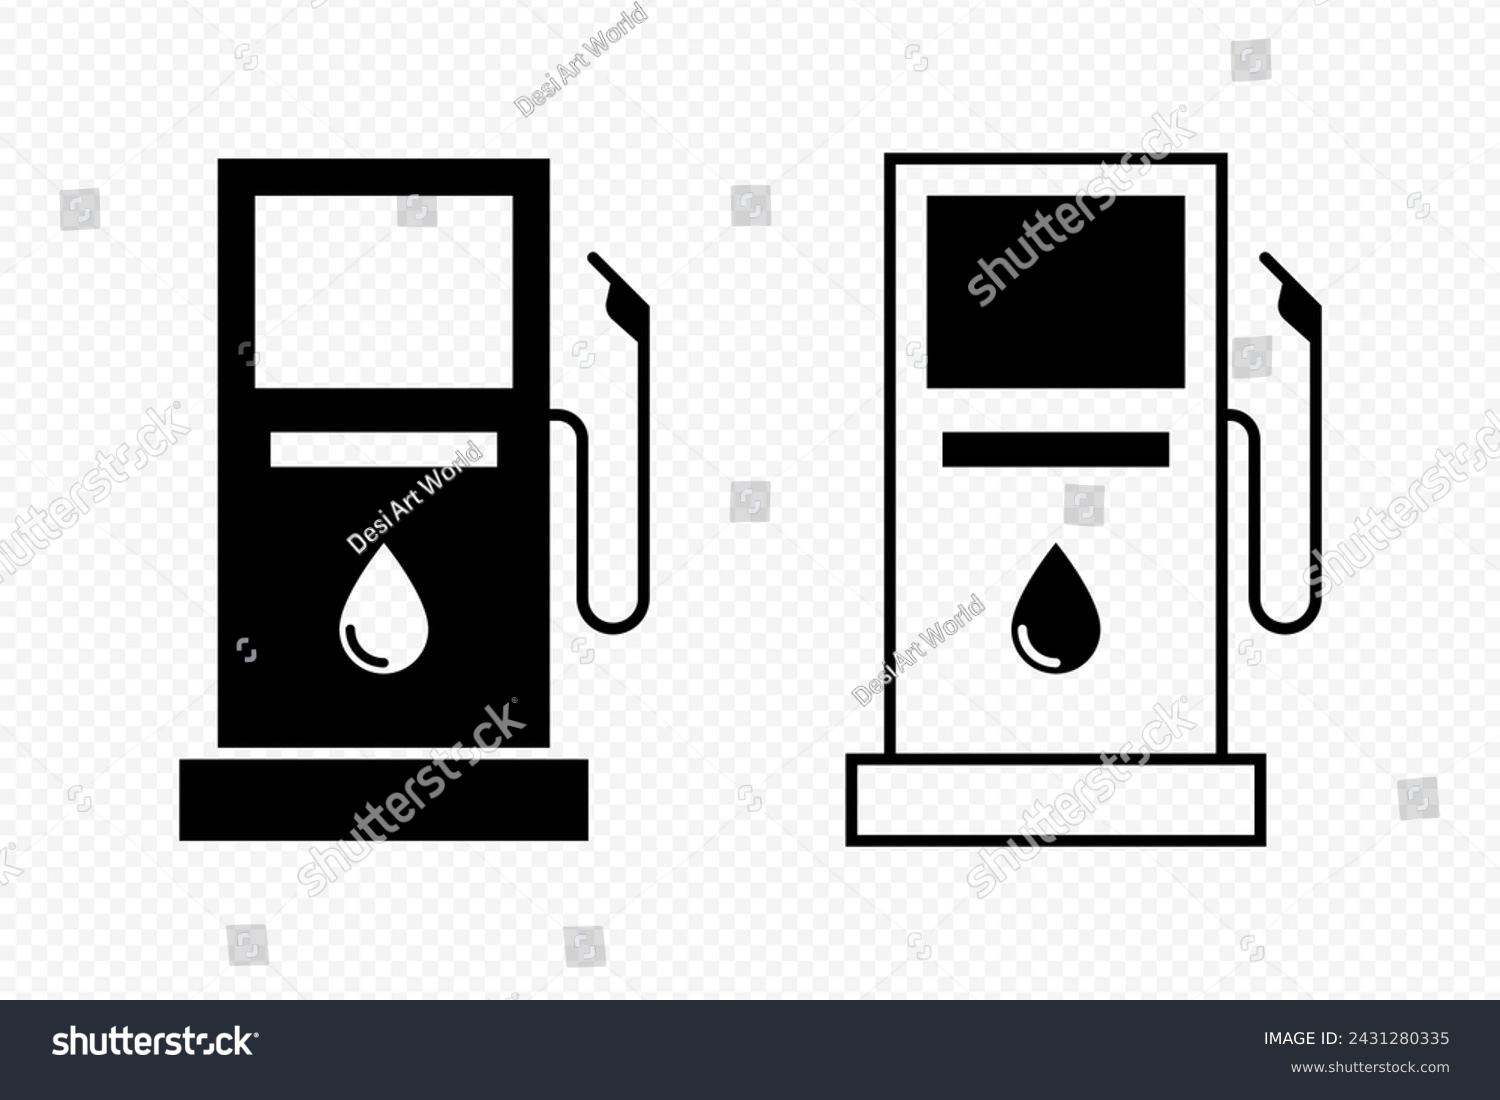 SVG of Petrol pump icon set isolated on transparent background svg